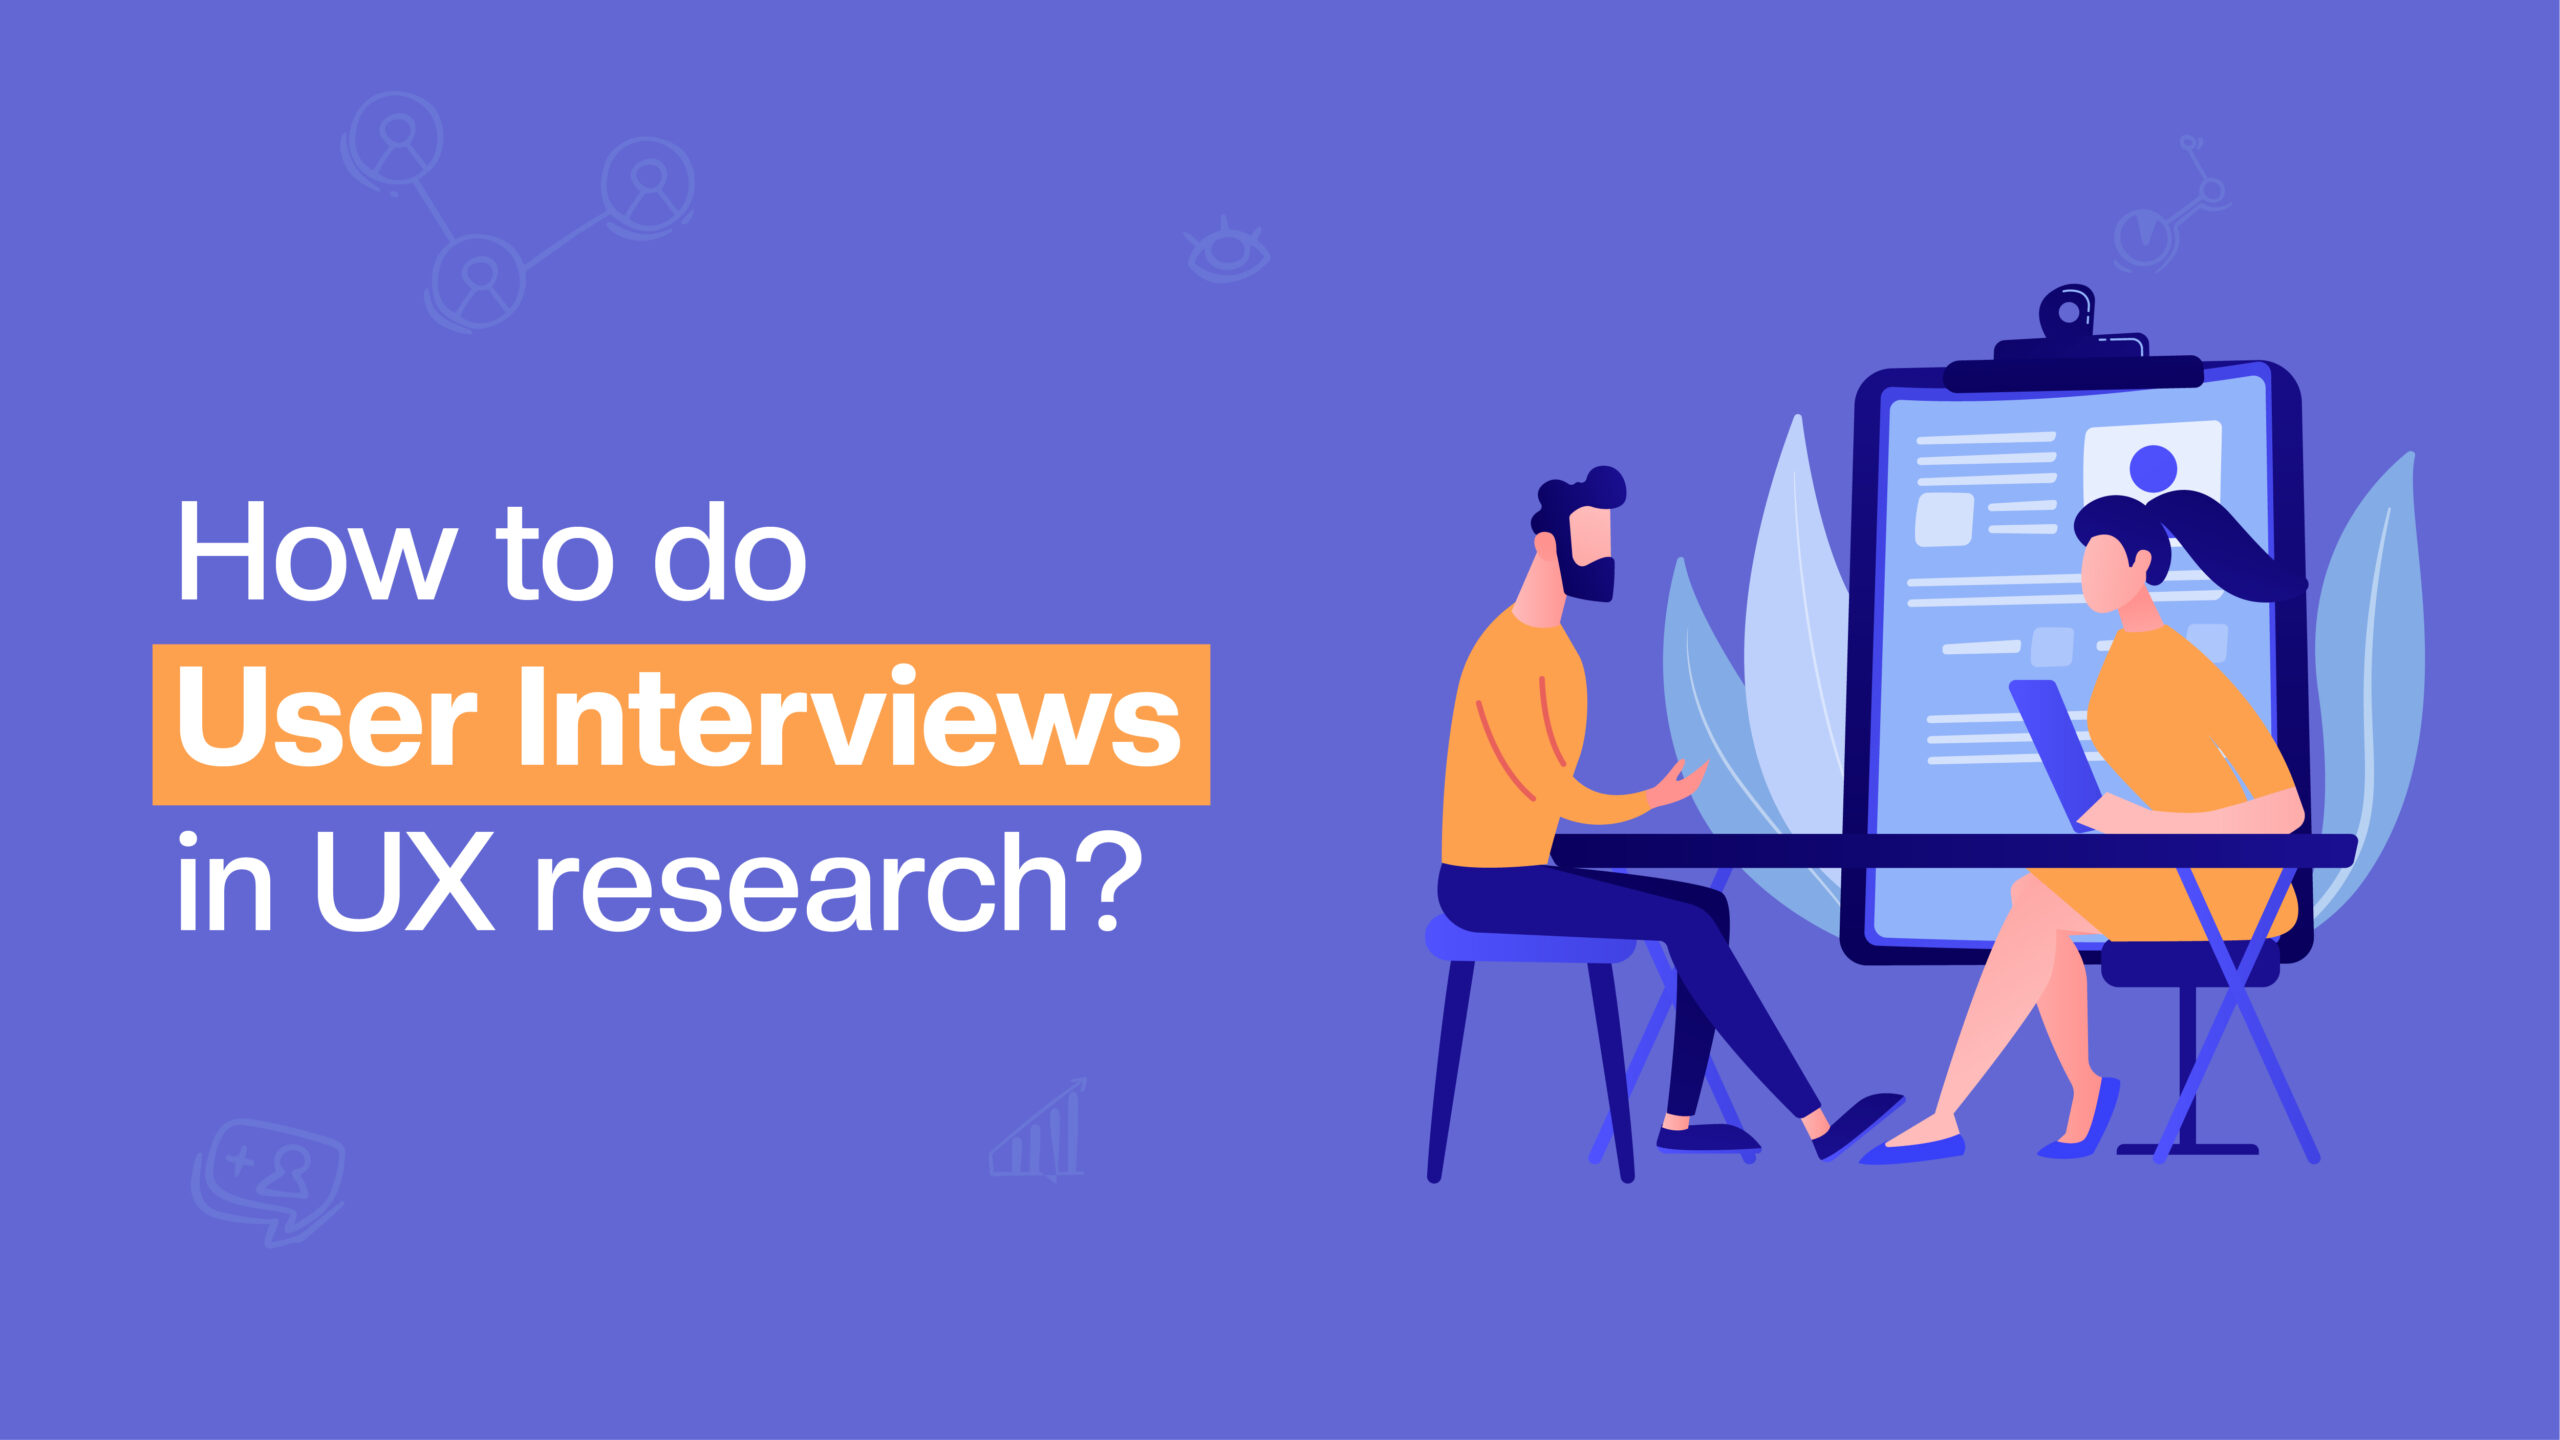 ux research user interview questions